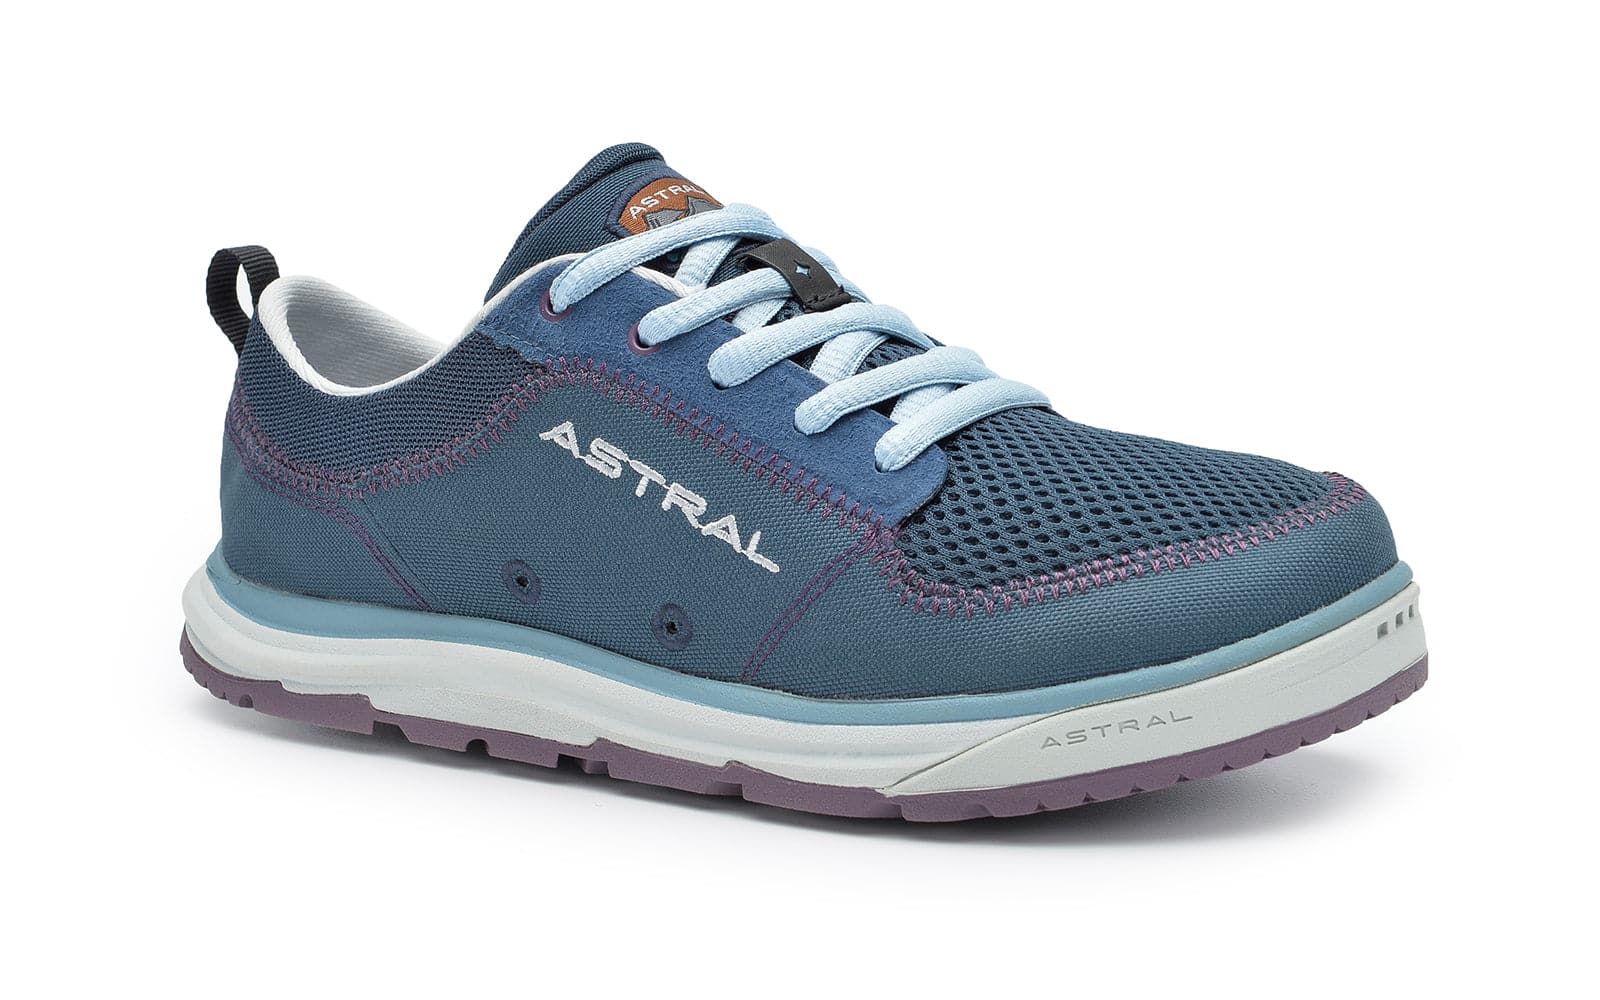 Featuring the Brewess 2.0 - Women's watersports, women's footwear manufactured by Astral shown here from a tenth angle.